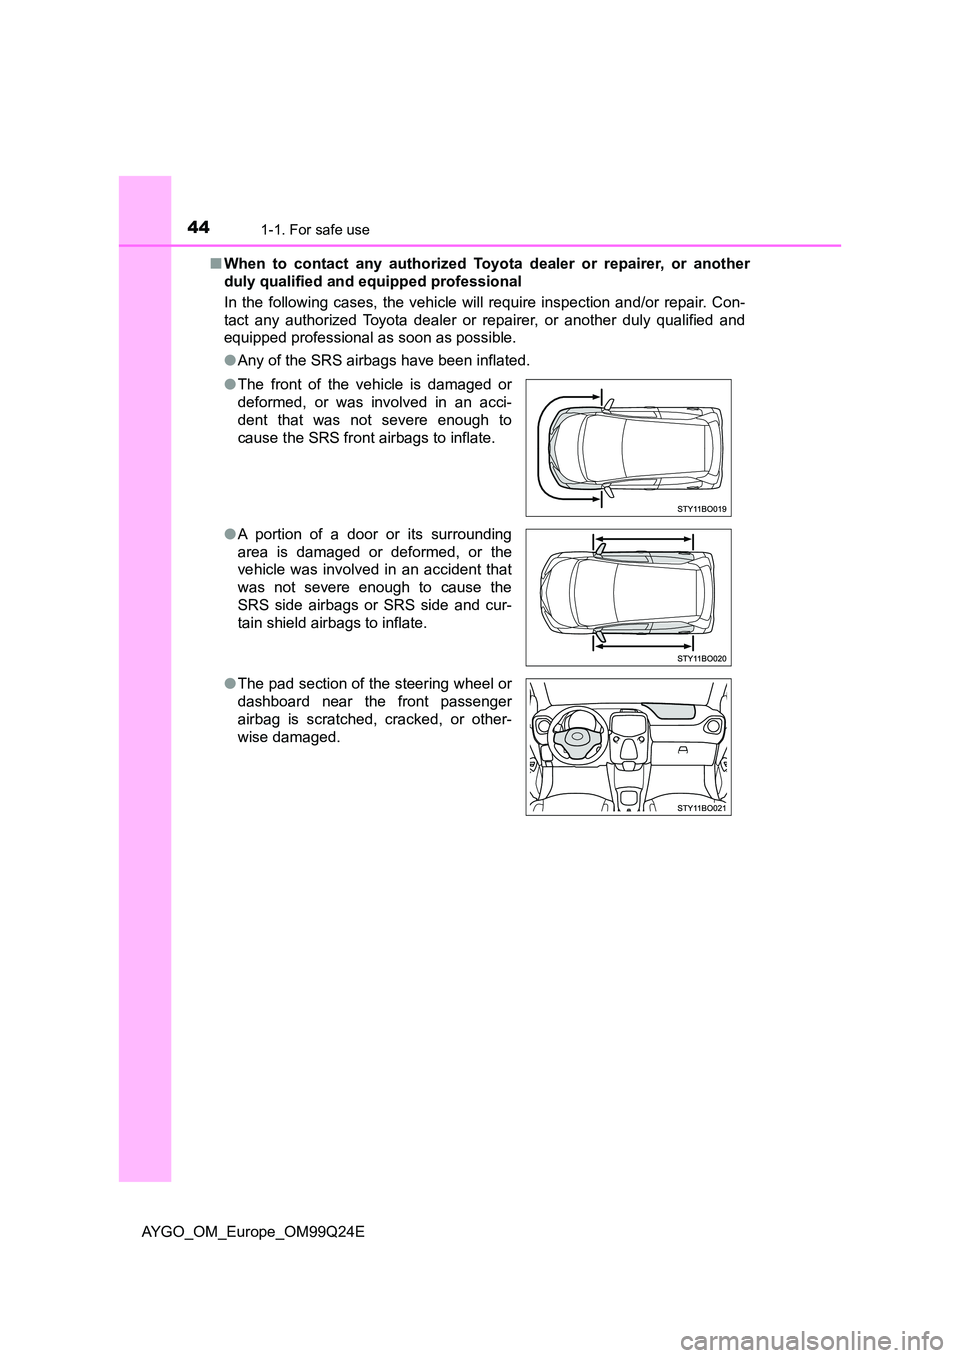 TOYOTA AYGO 2017  Owners Manual (in English) 441-1. For safe use
AYGO_OM_Europe_OM99Q24E 
■ When to contact any authorized Toyota dealer or repairer, or another 
duly qualified and equipped professional 
In the following cases, the vehicle wil